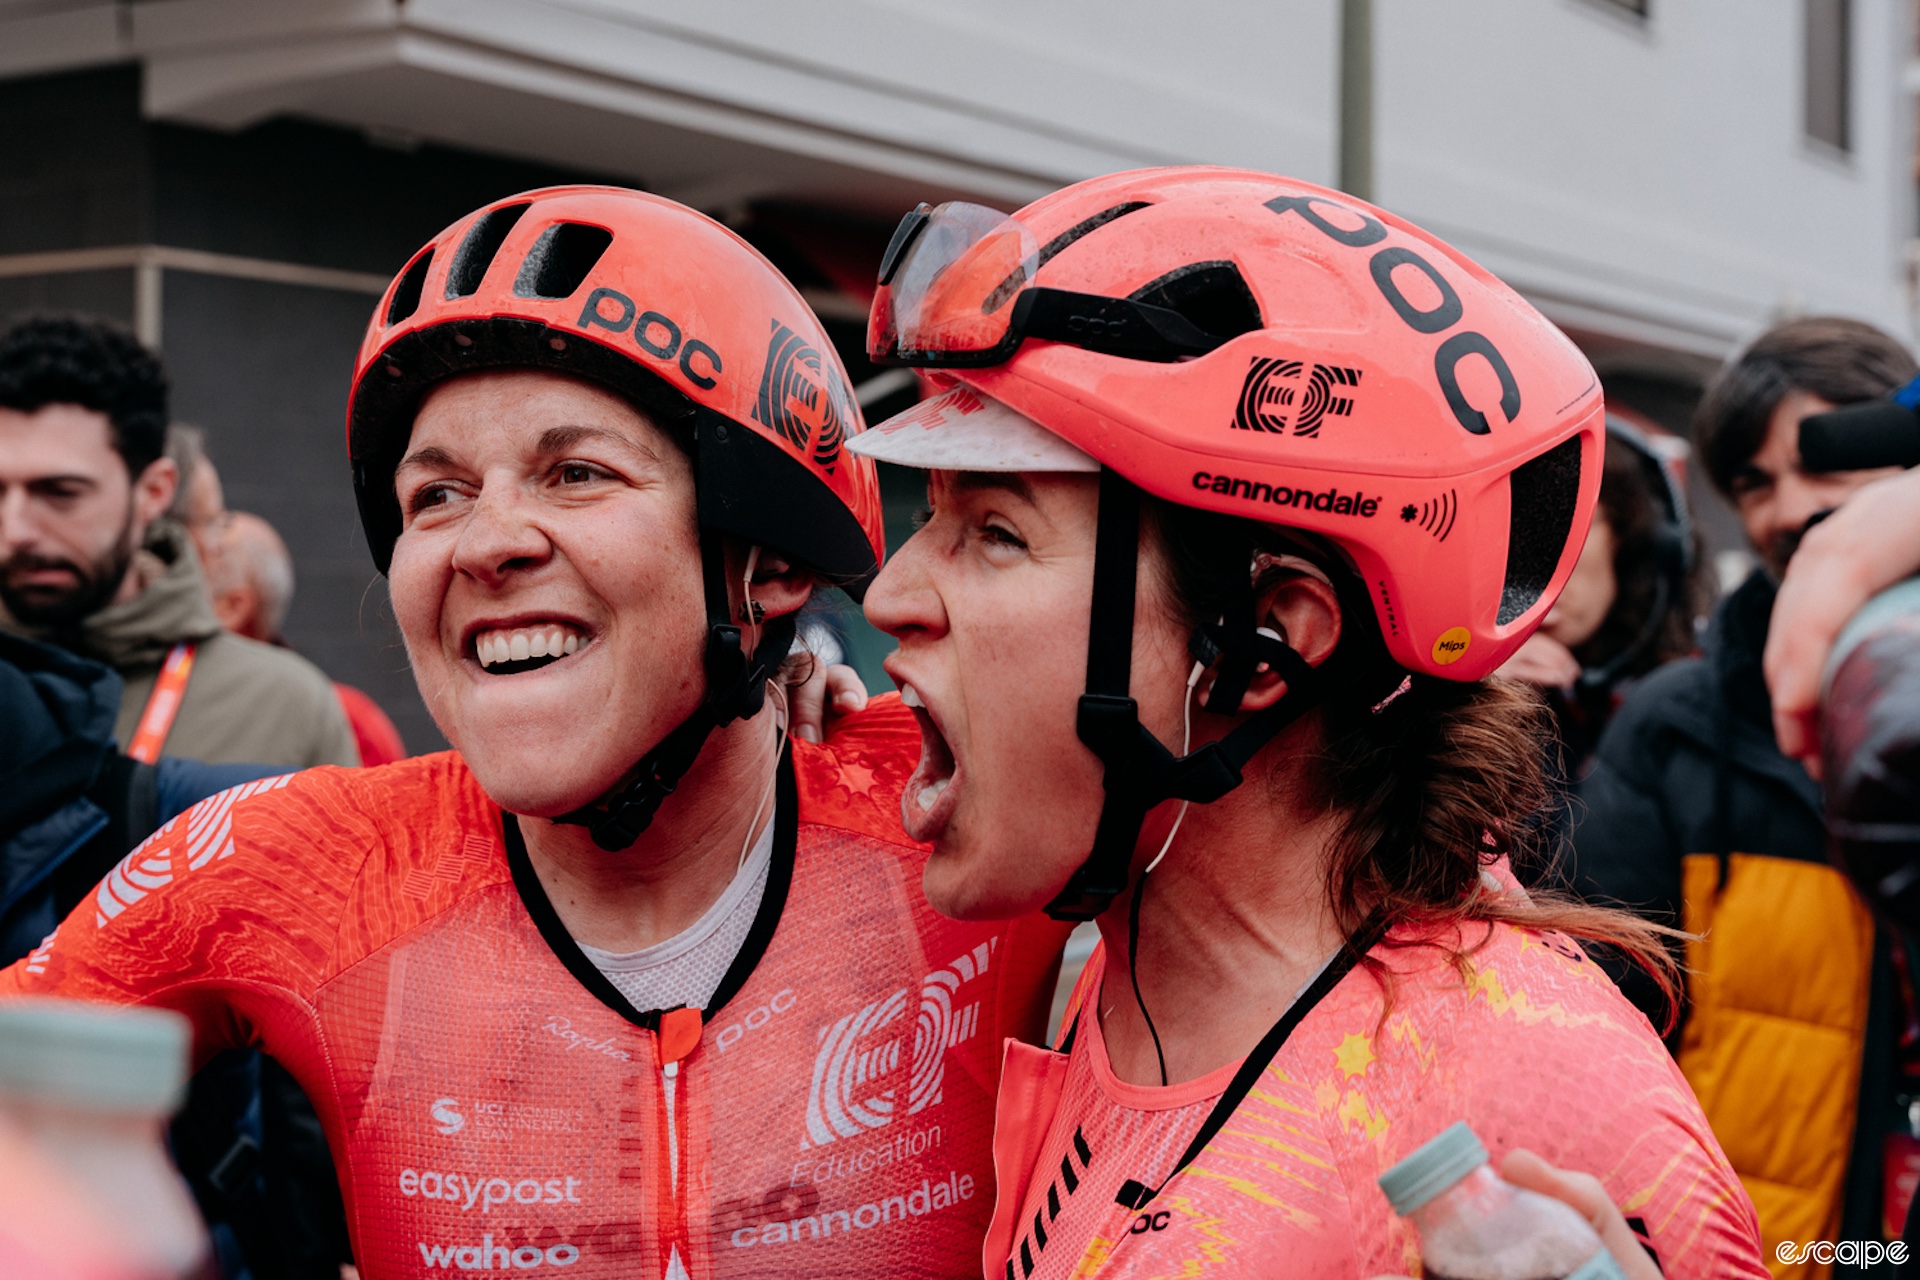 Alison Jackson and an EF teammate let out excited yells as they celebrate Jackson's stage win. Both riders have fierce expressions.